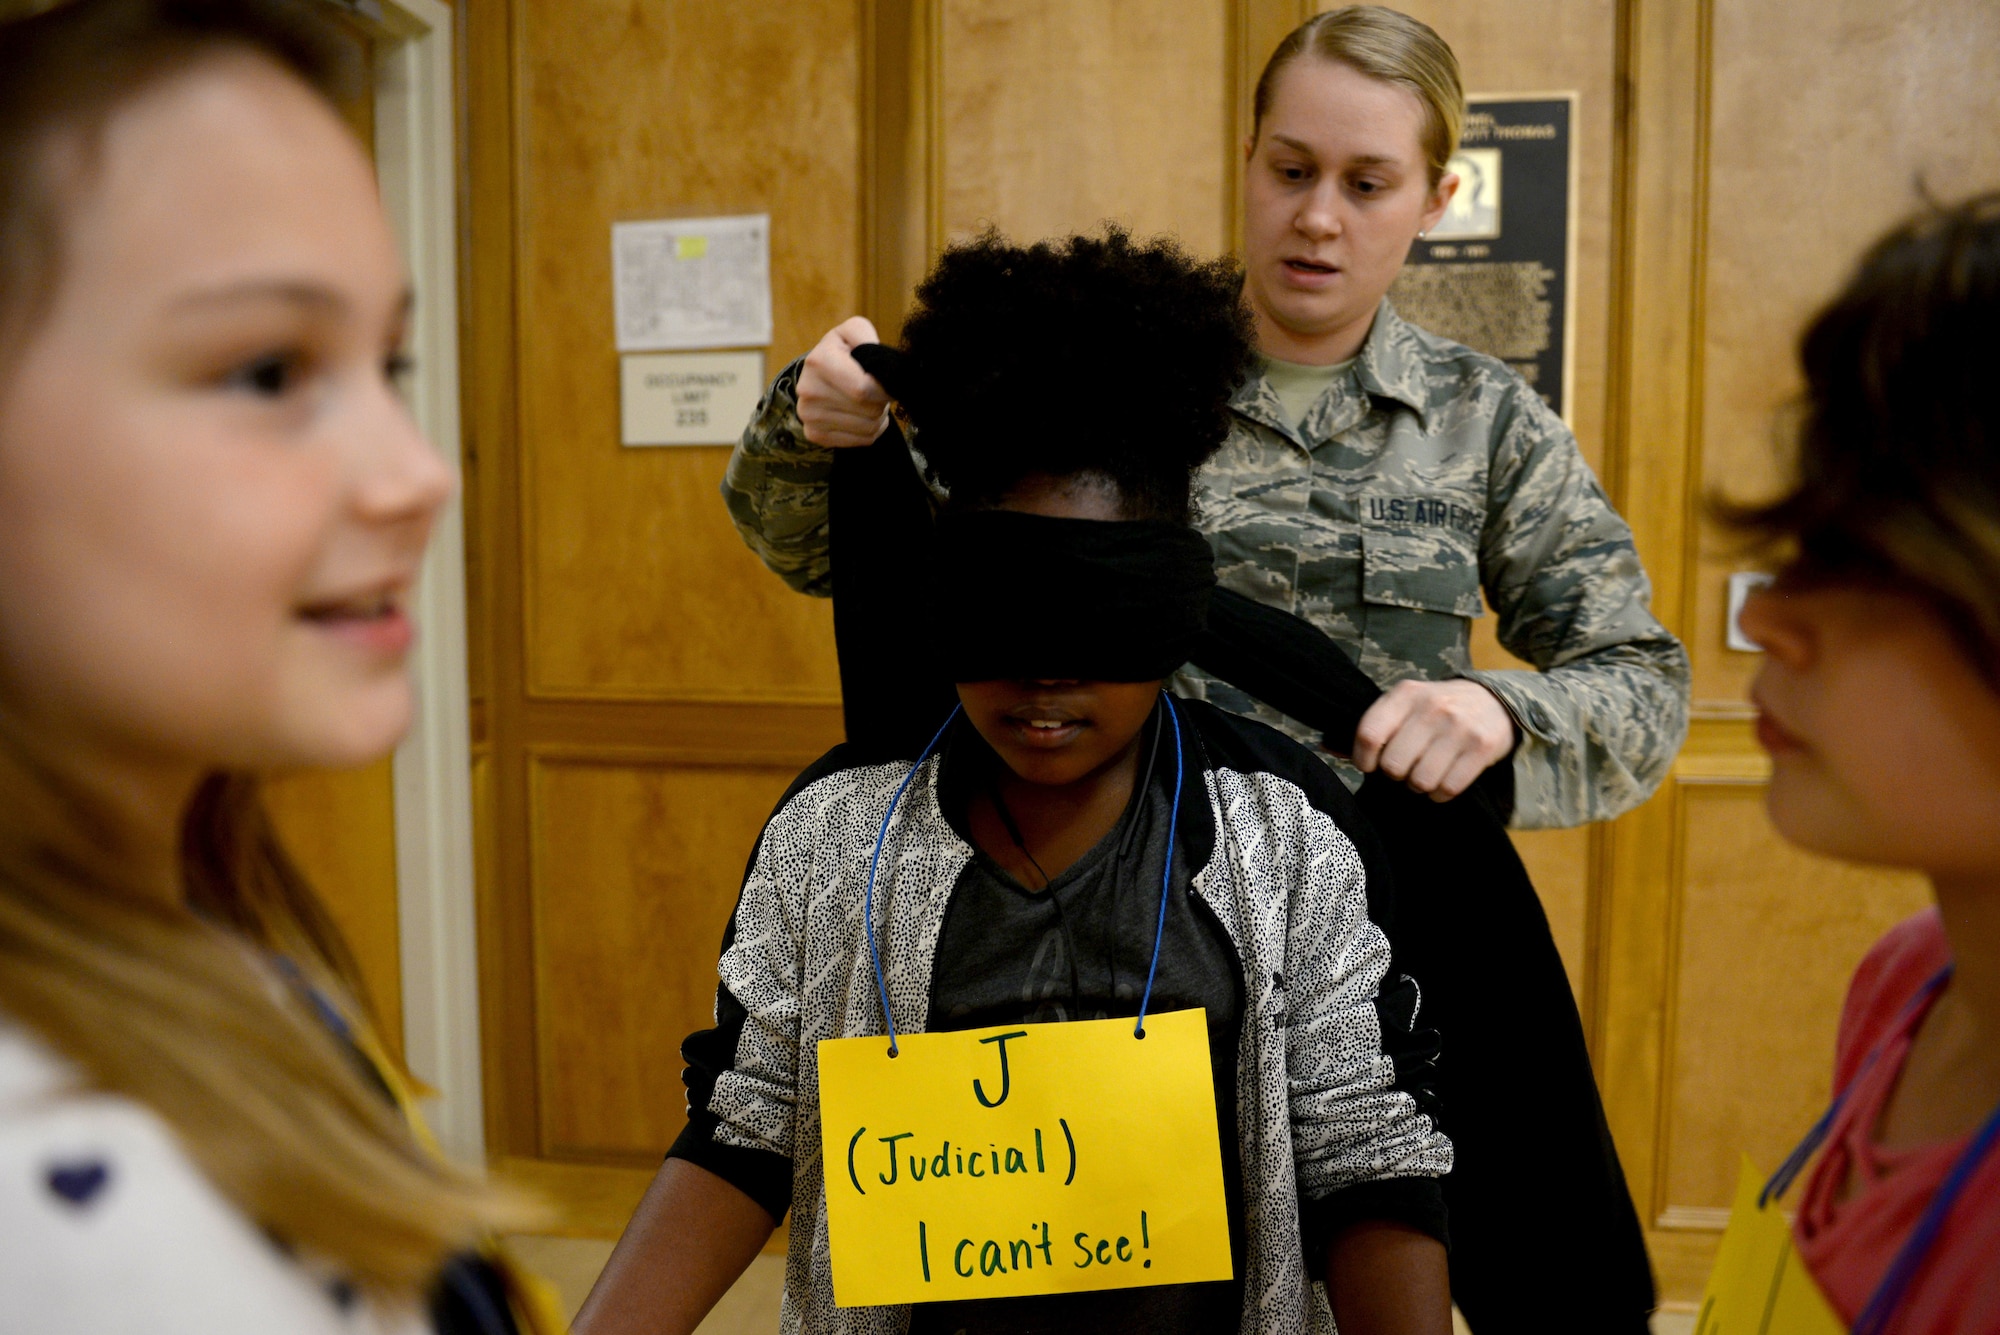 A young girl gets a black scarf tied around her eyes by a woman in the Airman Battle Uniform and two girls smile at the edge of the photo.